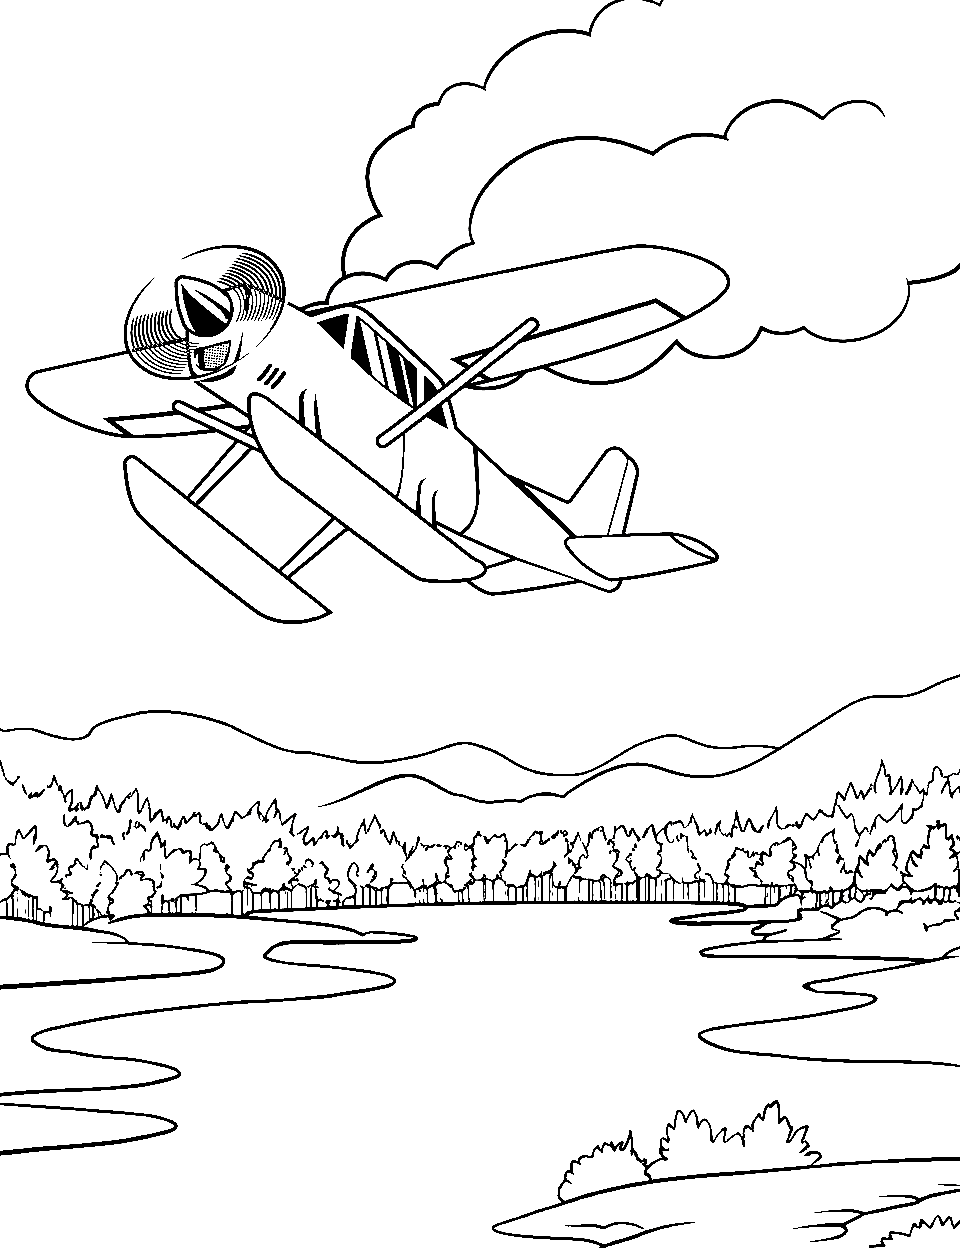 Seaplane Adventure Airplane Coloring Page - A seaplane flying over a lake surrounded by trees.